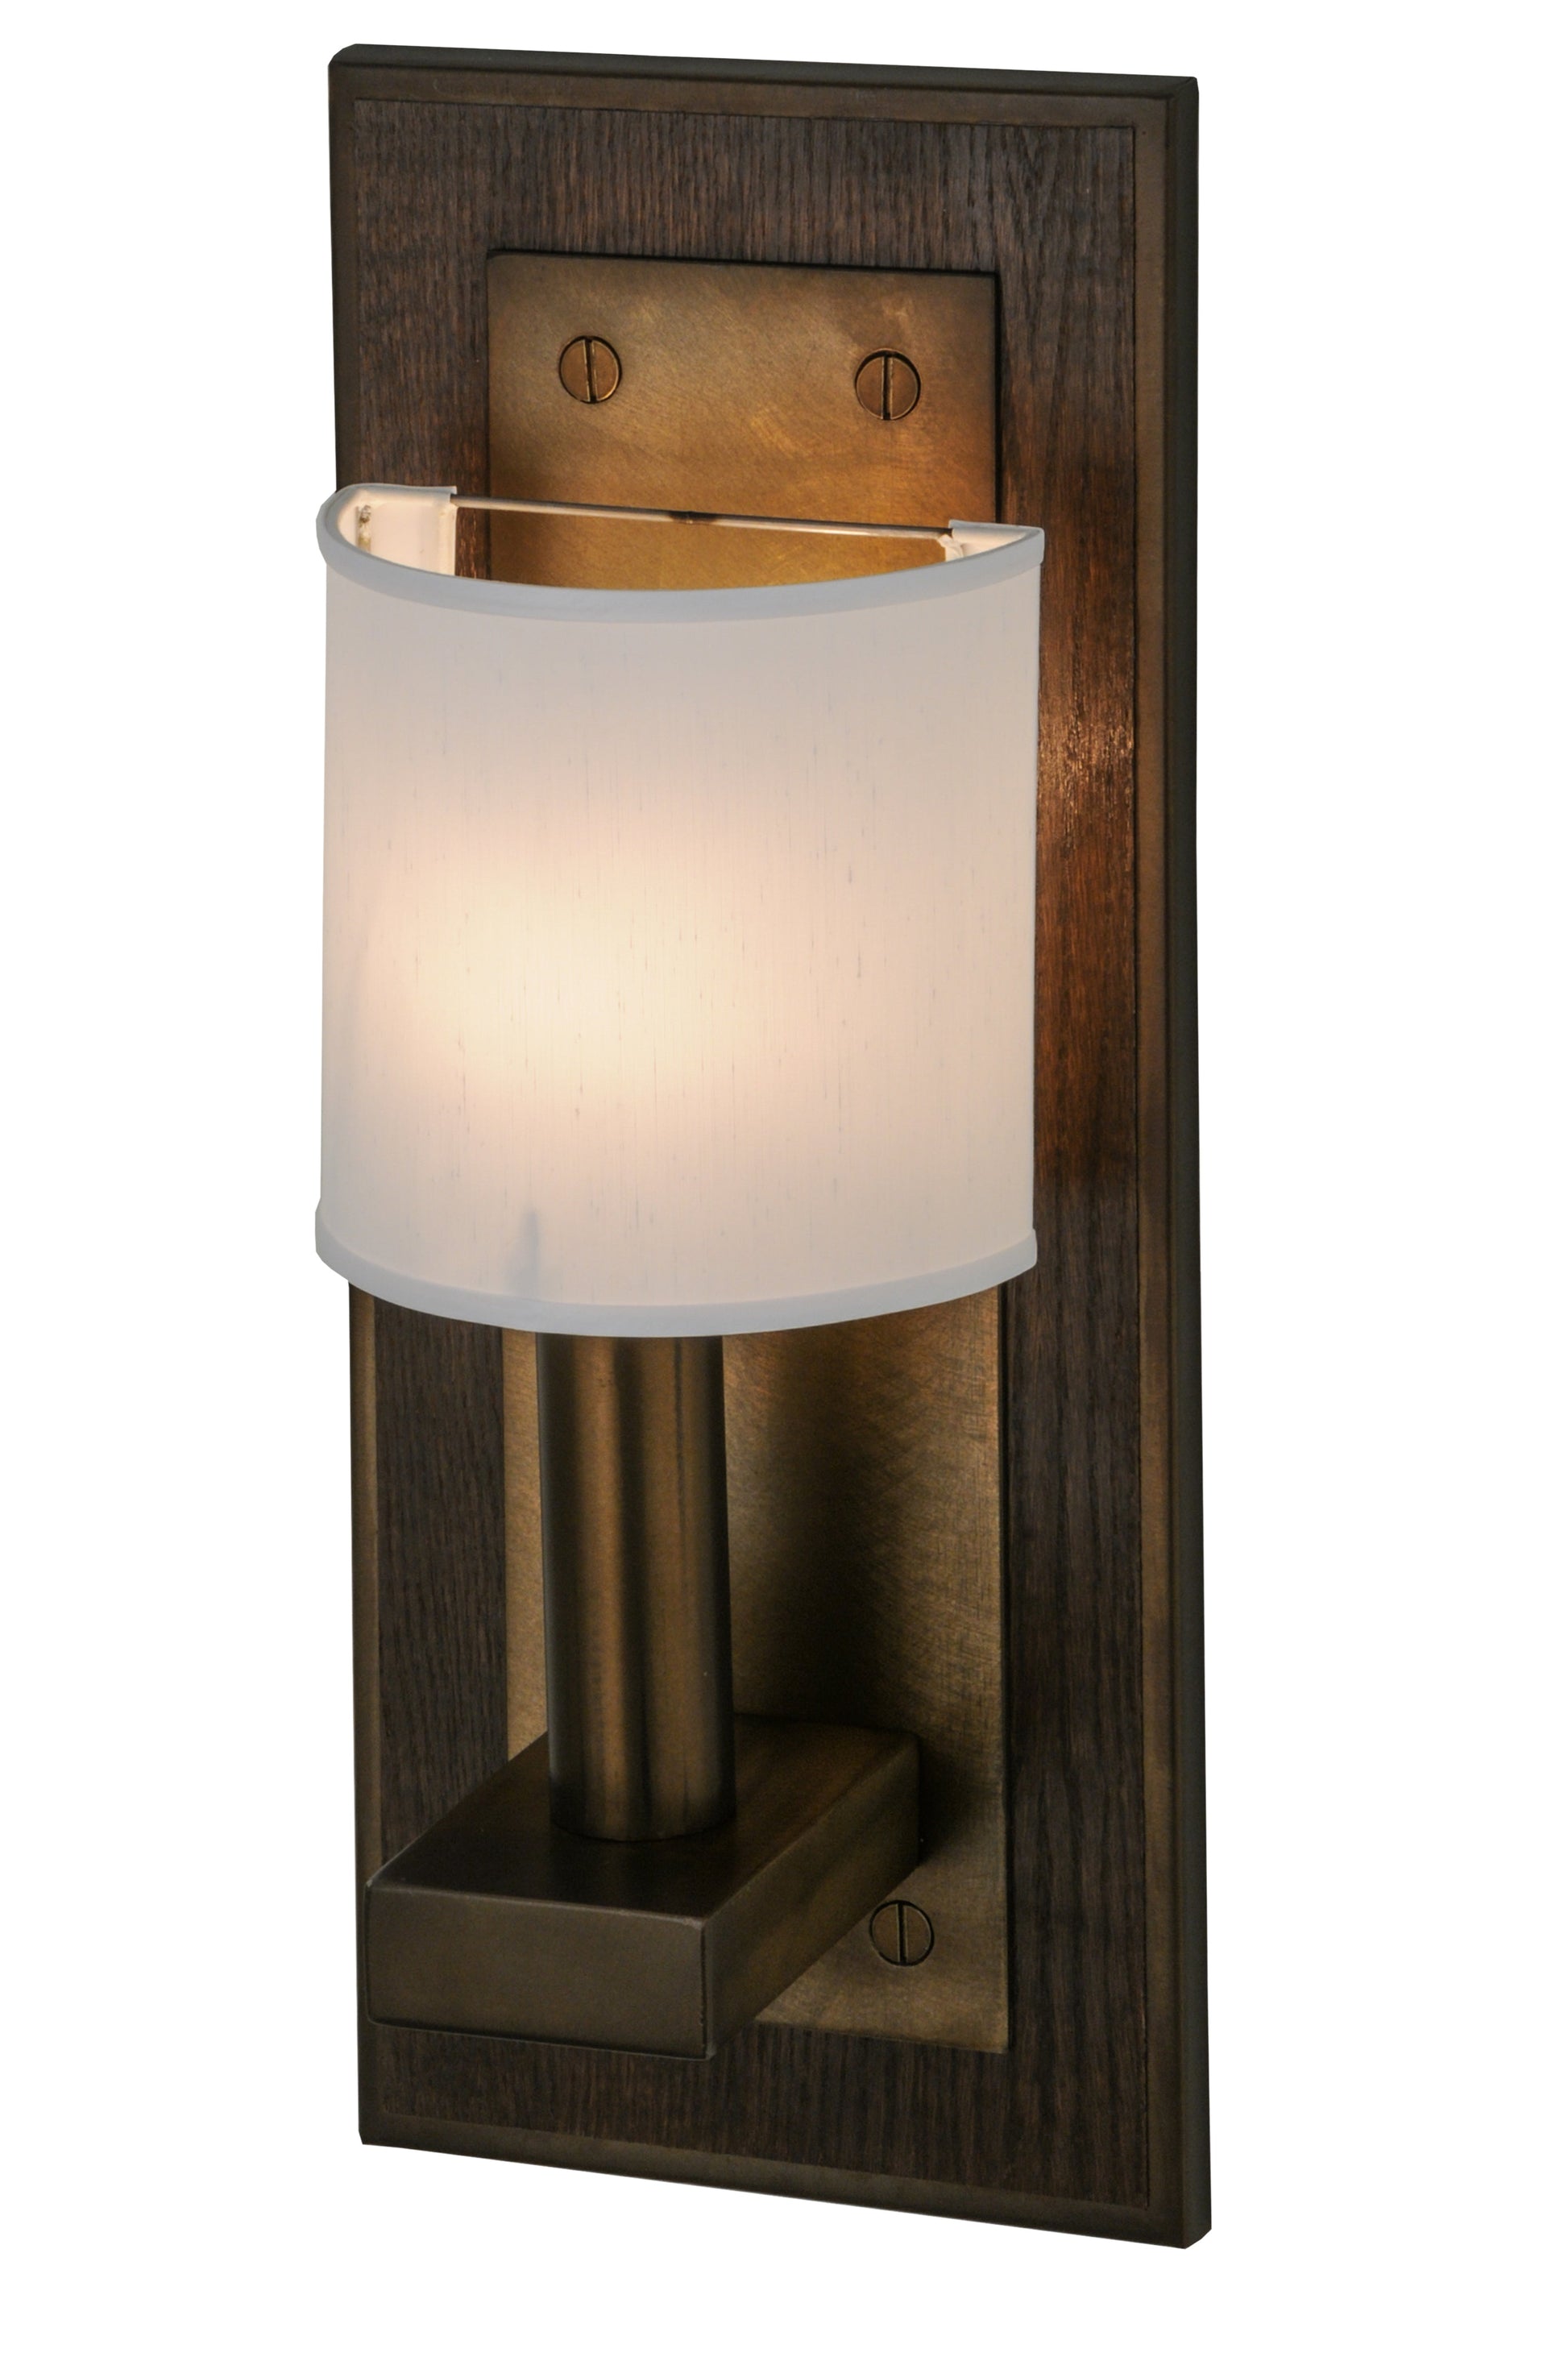 10" Bonn Wall Sconce by 2nd Ave Lighting